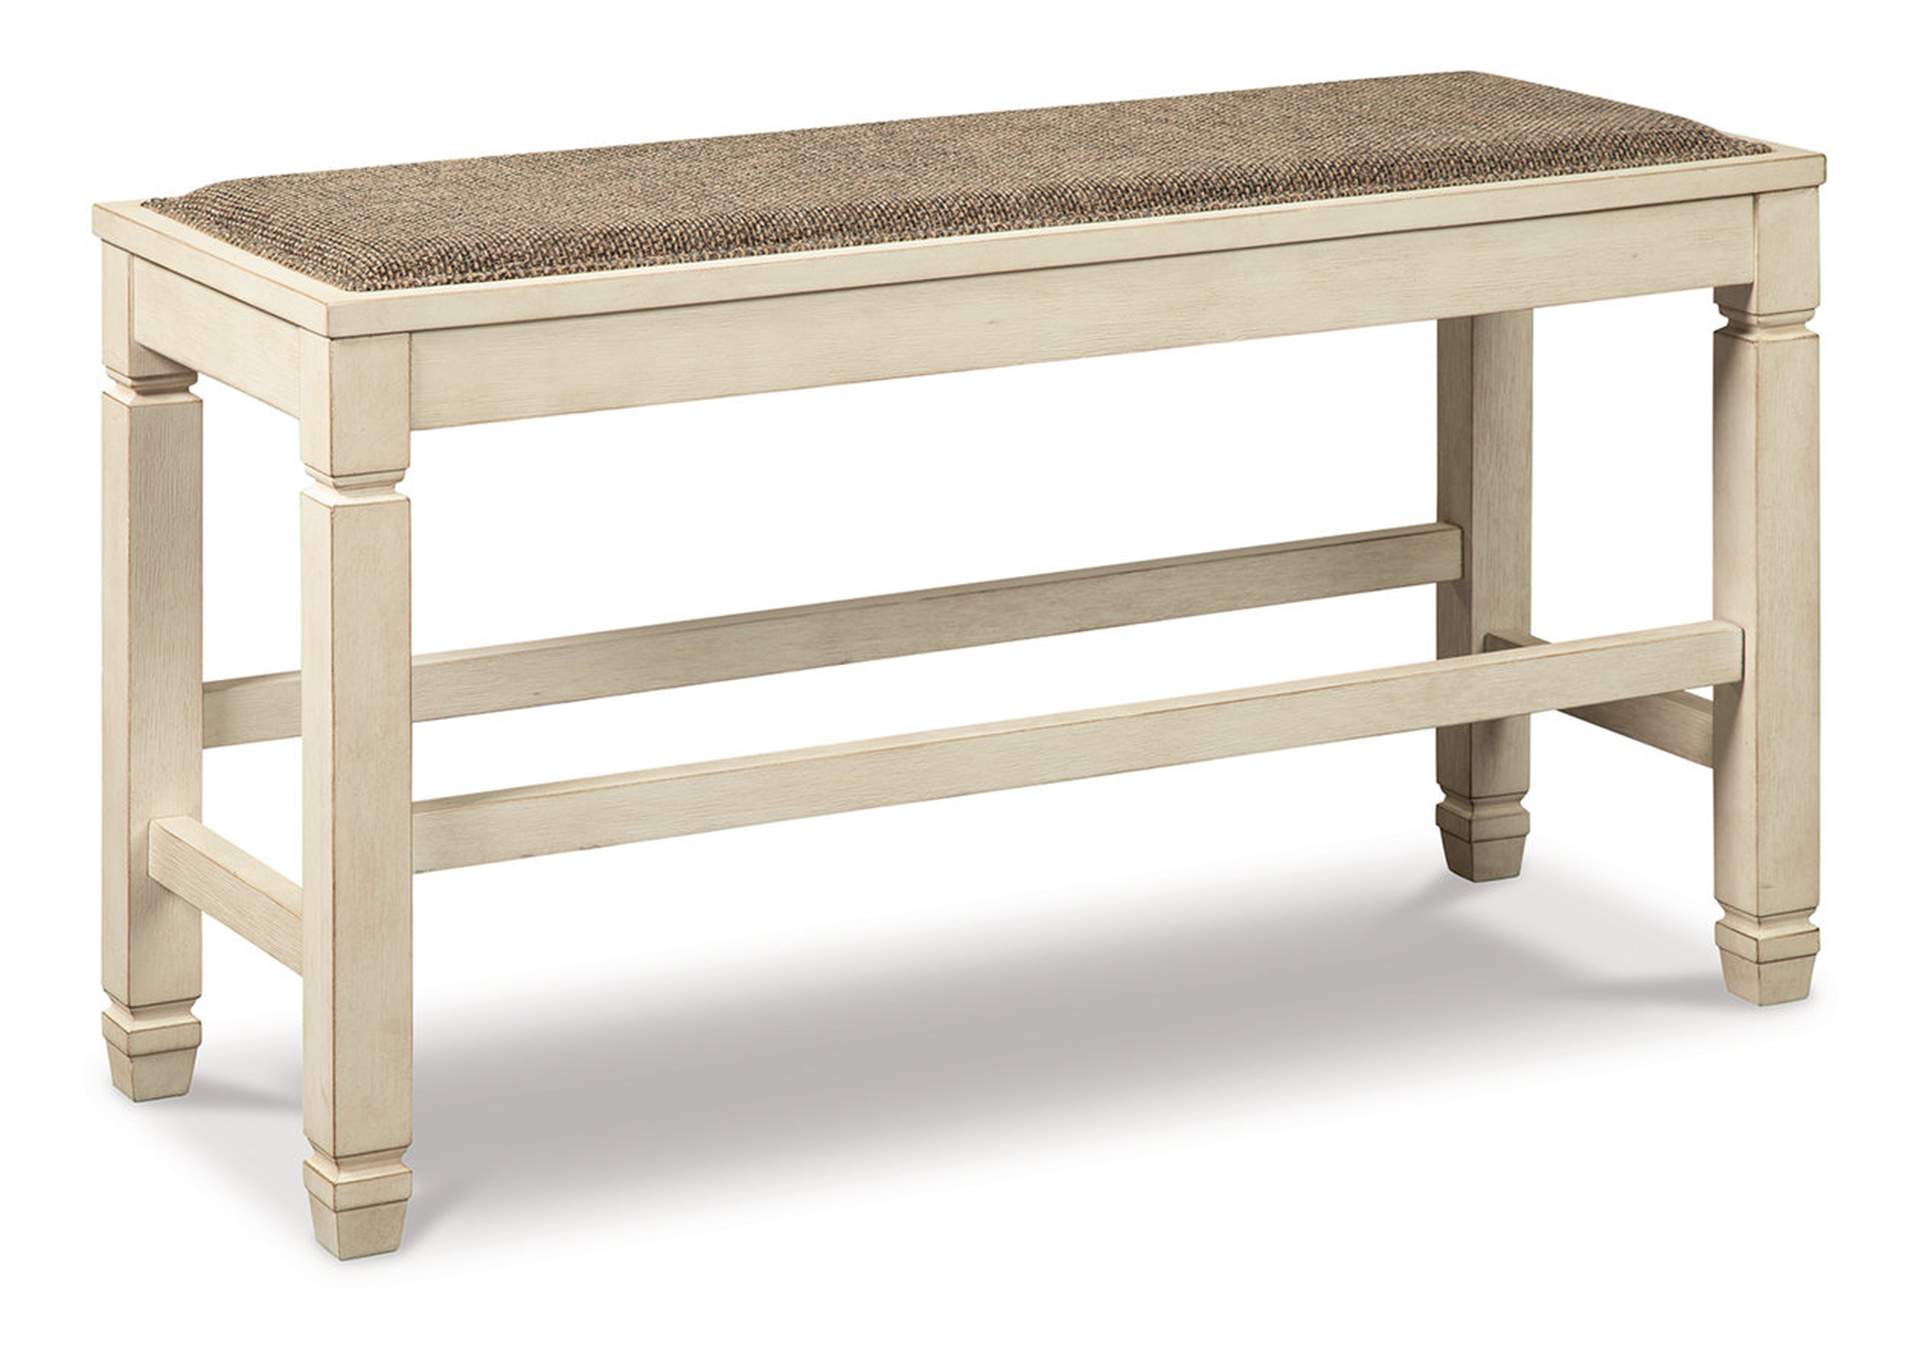 Bolanburg Counter Height Dining Room Bench,Direct To Consumer Express